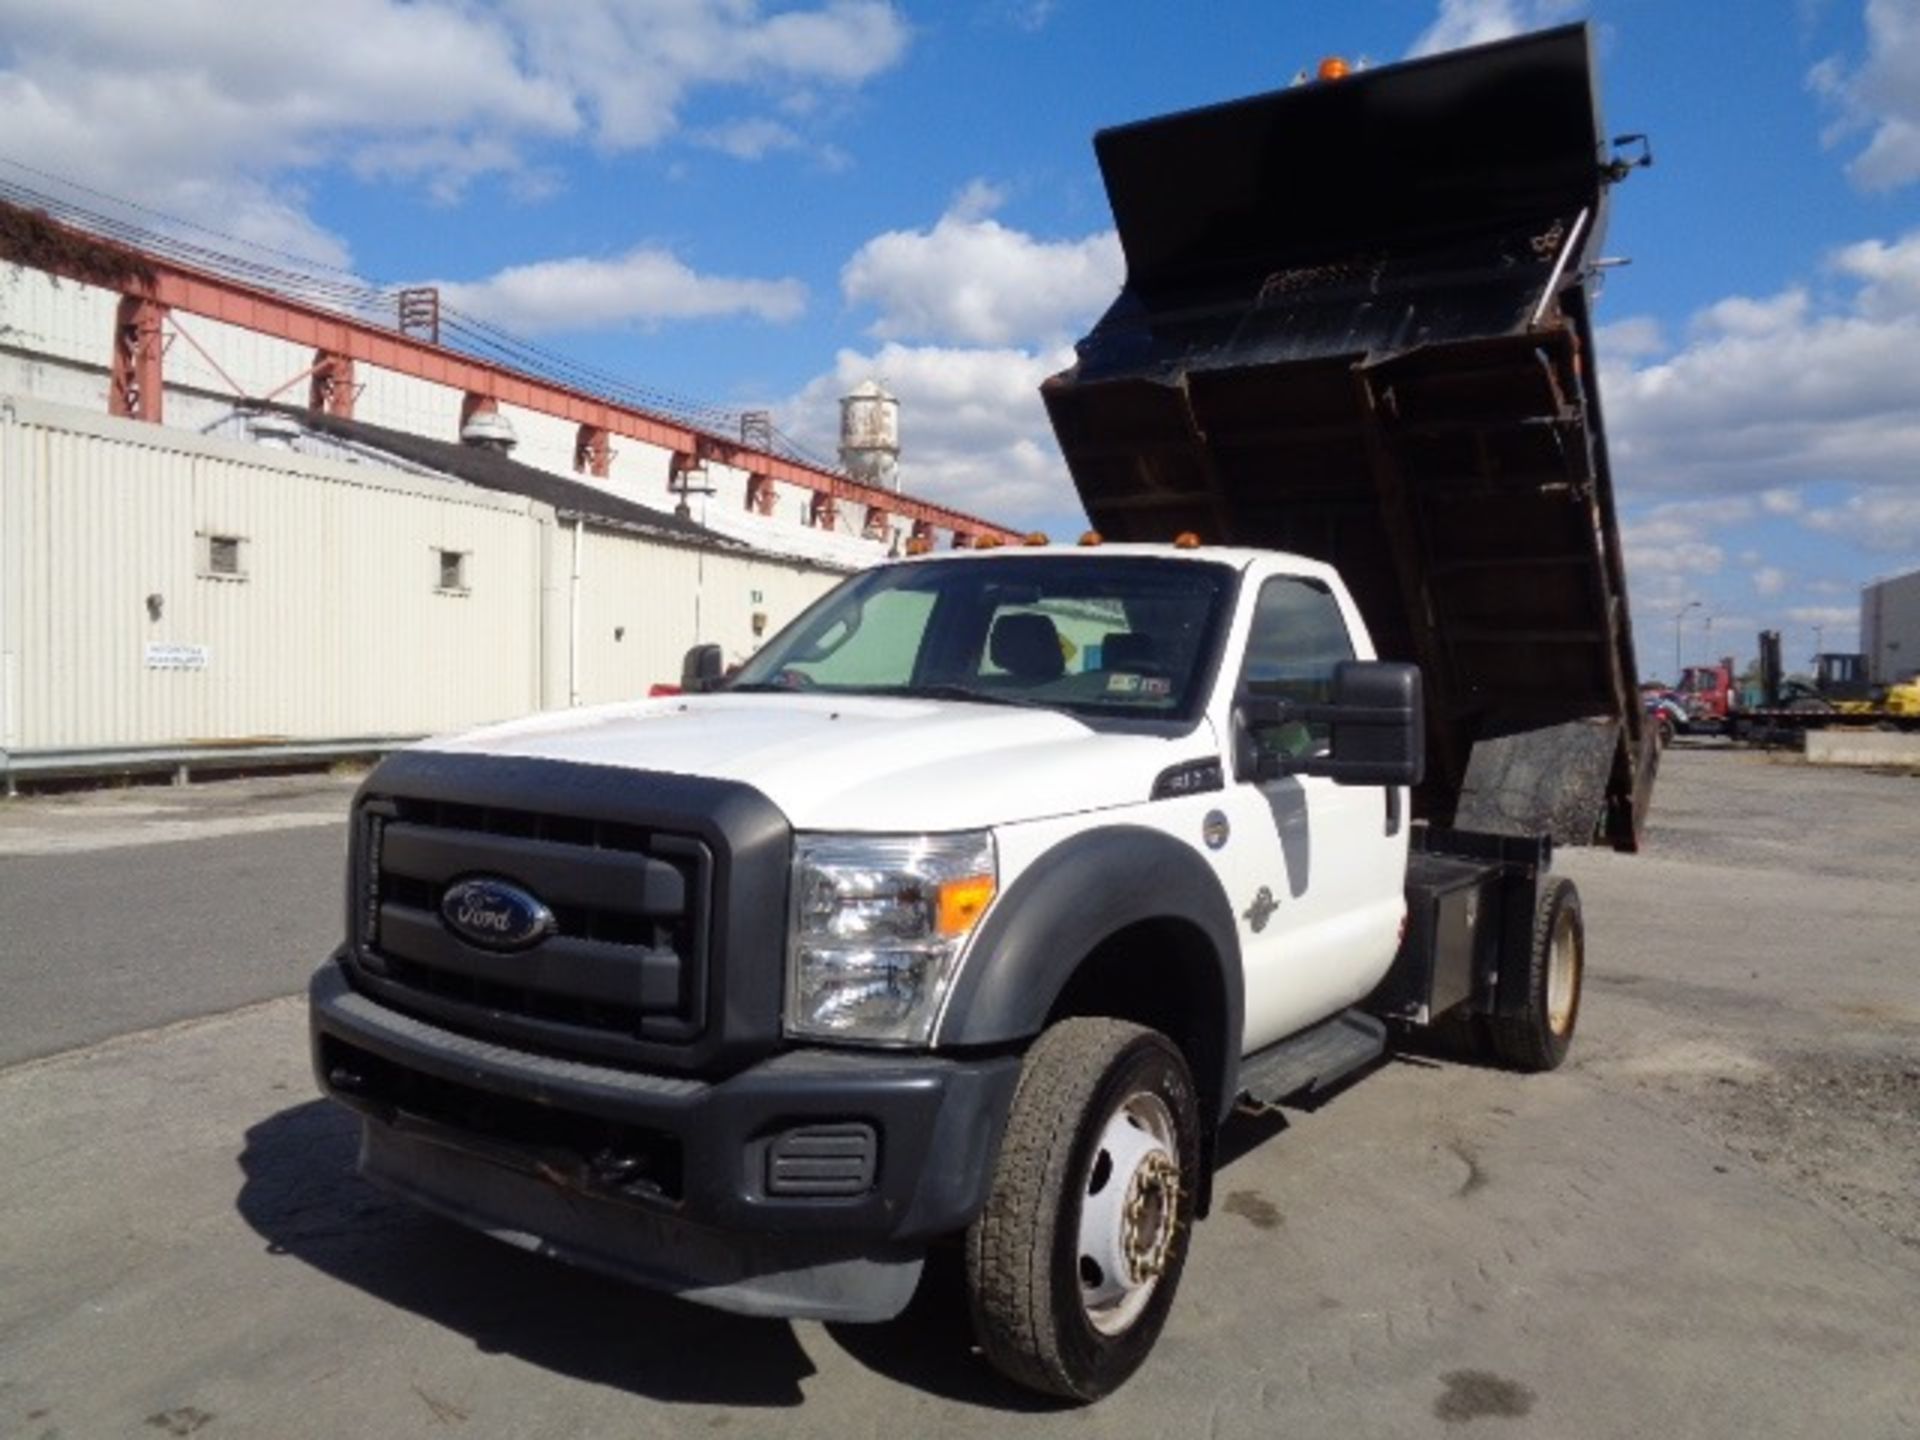 2012 Ford F550 Dump Truck - Image 11 of 19